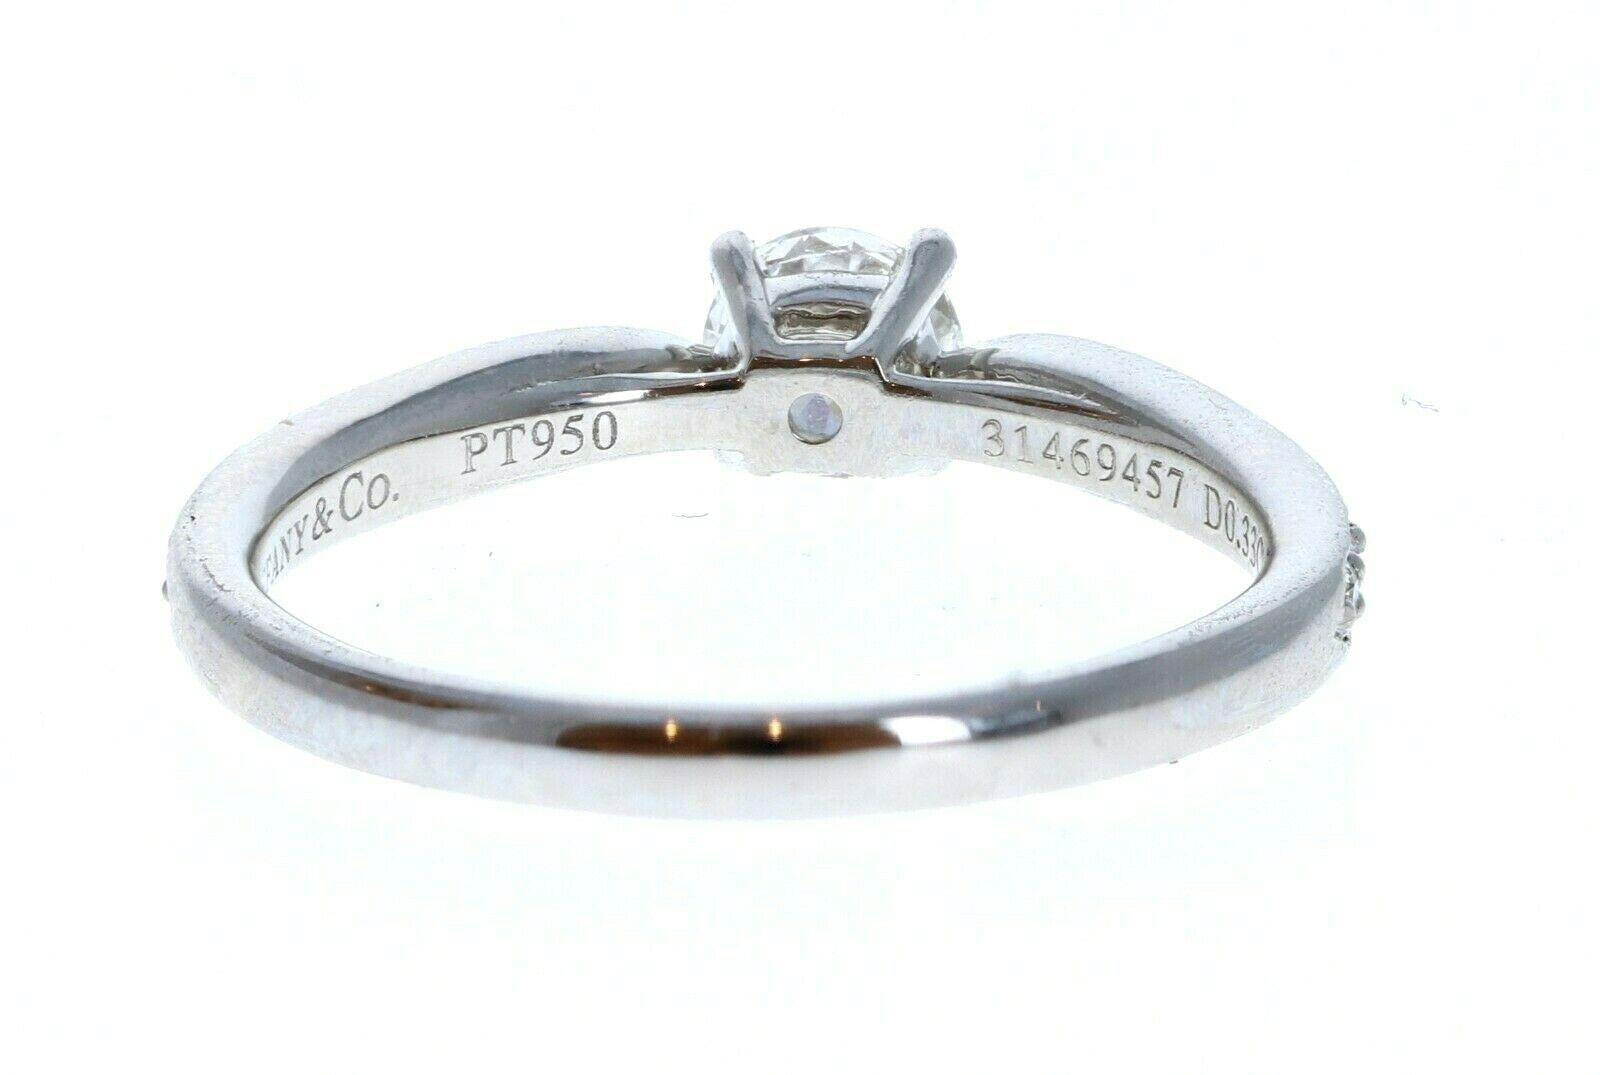 Tiffany & Co Platinum & Diamond Engagement Ring 0.33ctw F VVS2 


For sale is a Tiffany & Co platinum and diamond  engagement ring. 
The center stone is 0.33 ct round brilliant cut diamond F, VVS2
The mounting is comprised of approx. 0.25 cts. of